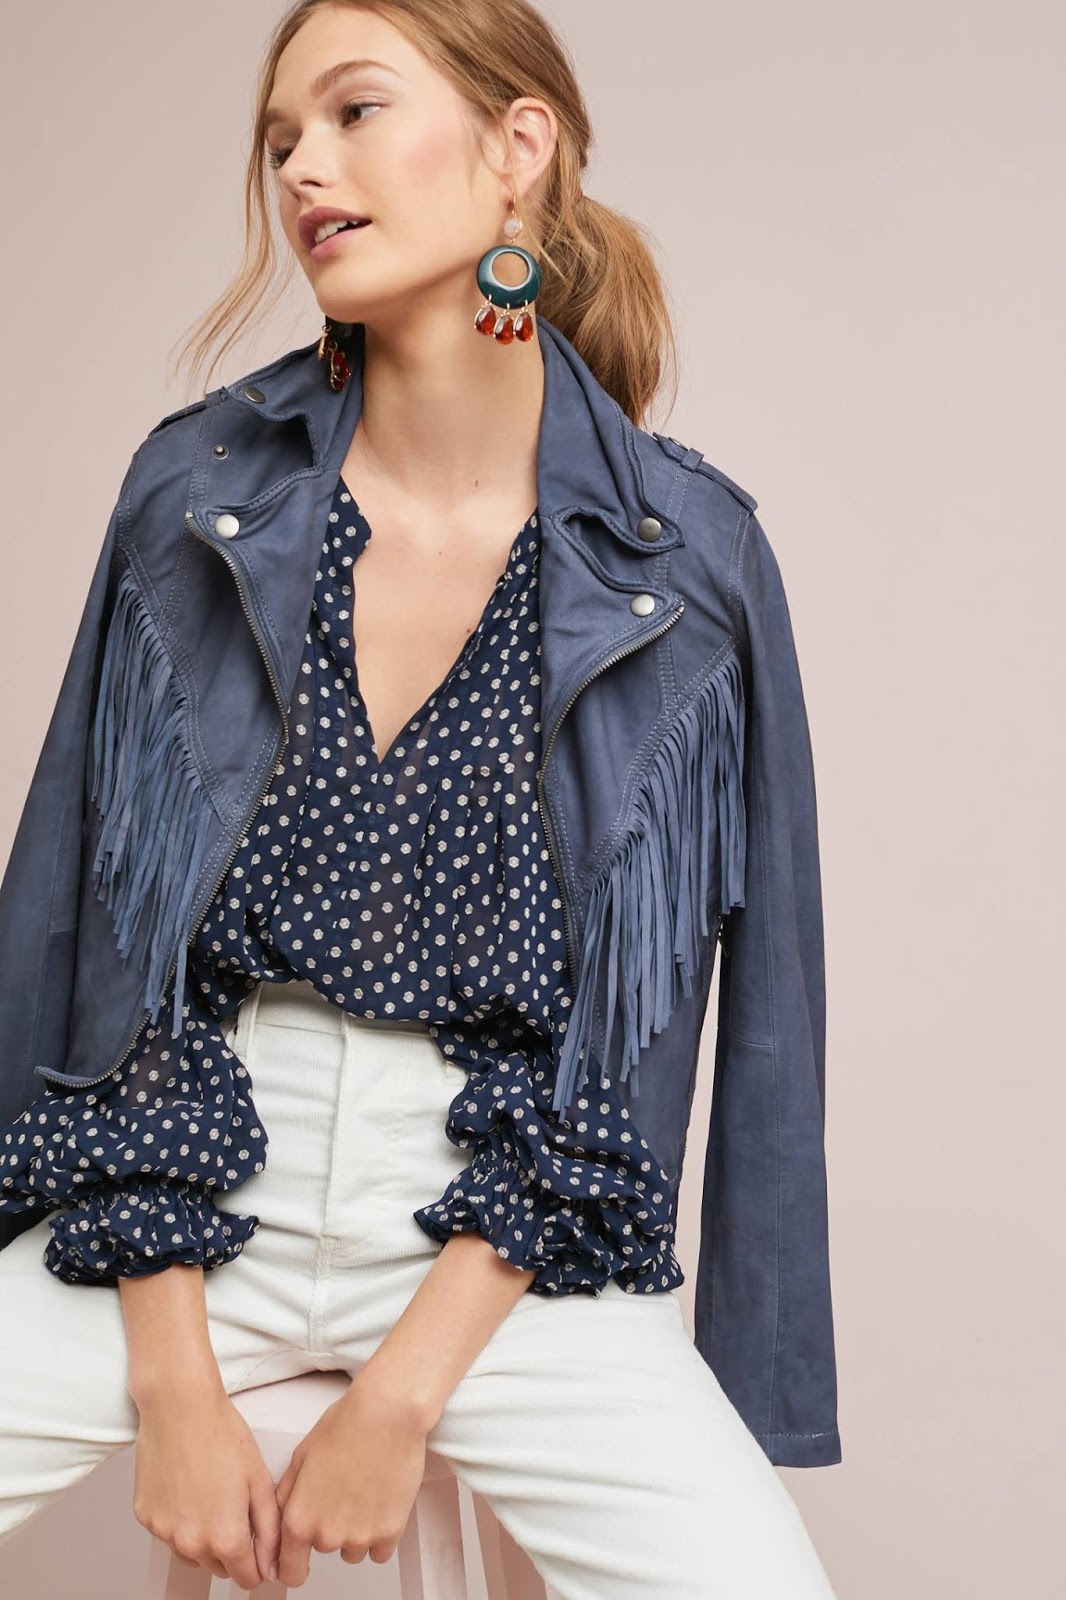 Investigating the Anthropologie October 2018 new arrivals :: Effortlessly with Roxy